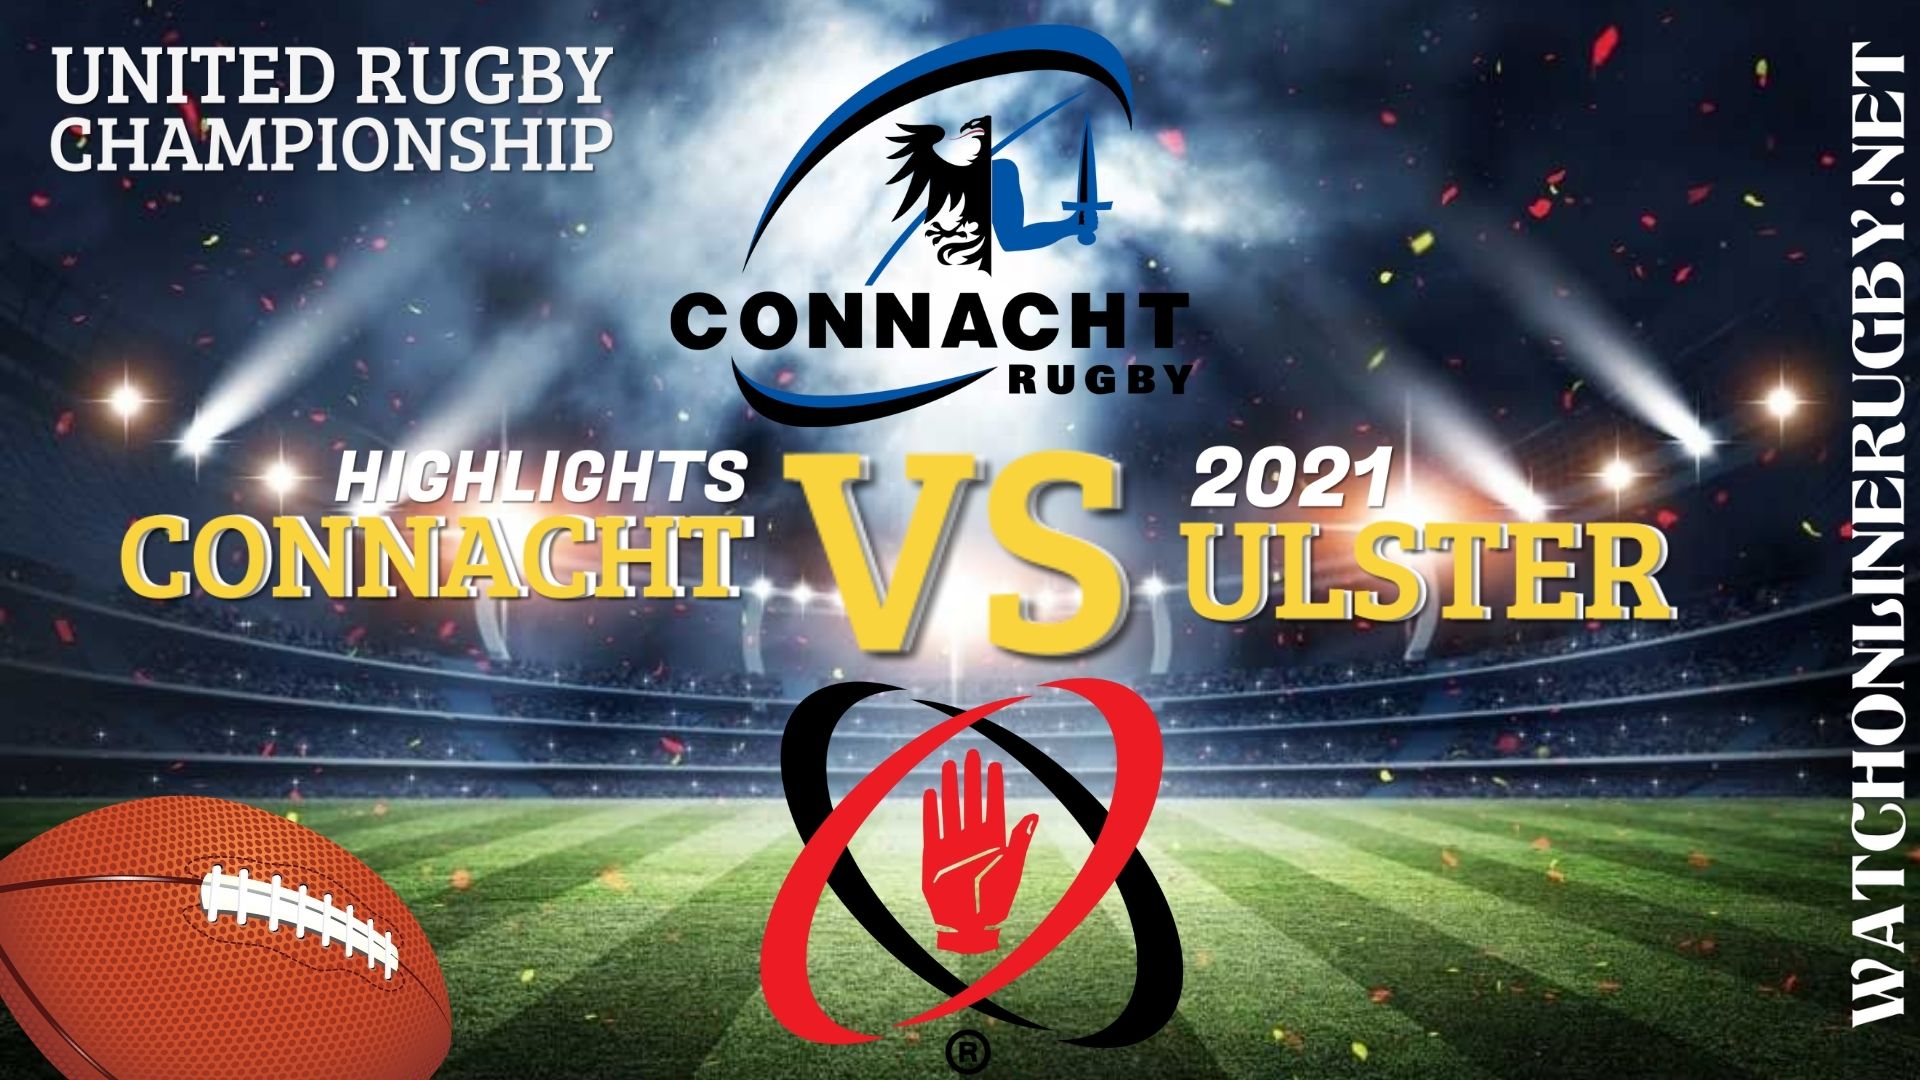 Connacht Vs Ulster United Rugby Championship 2021 RD 5